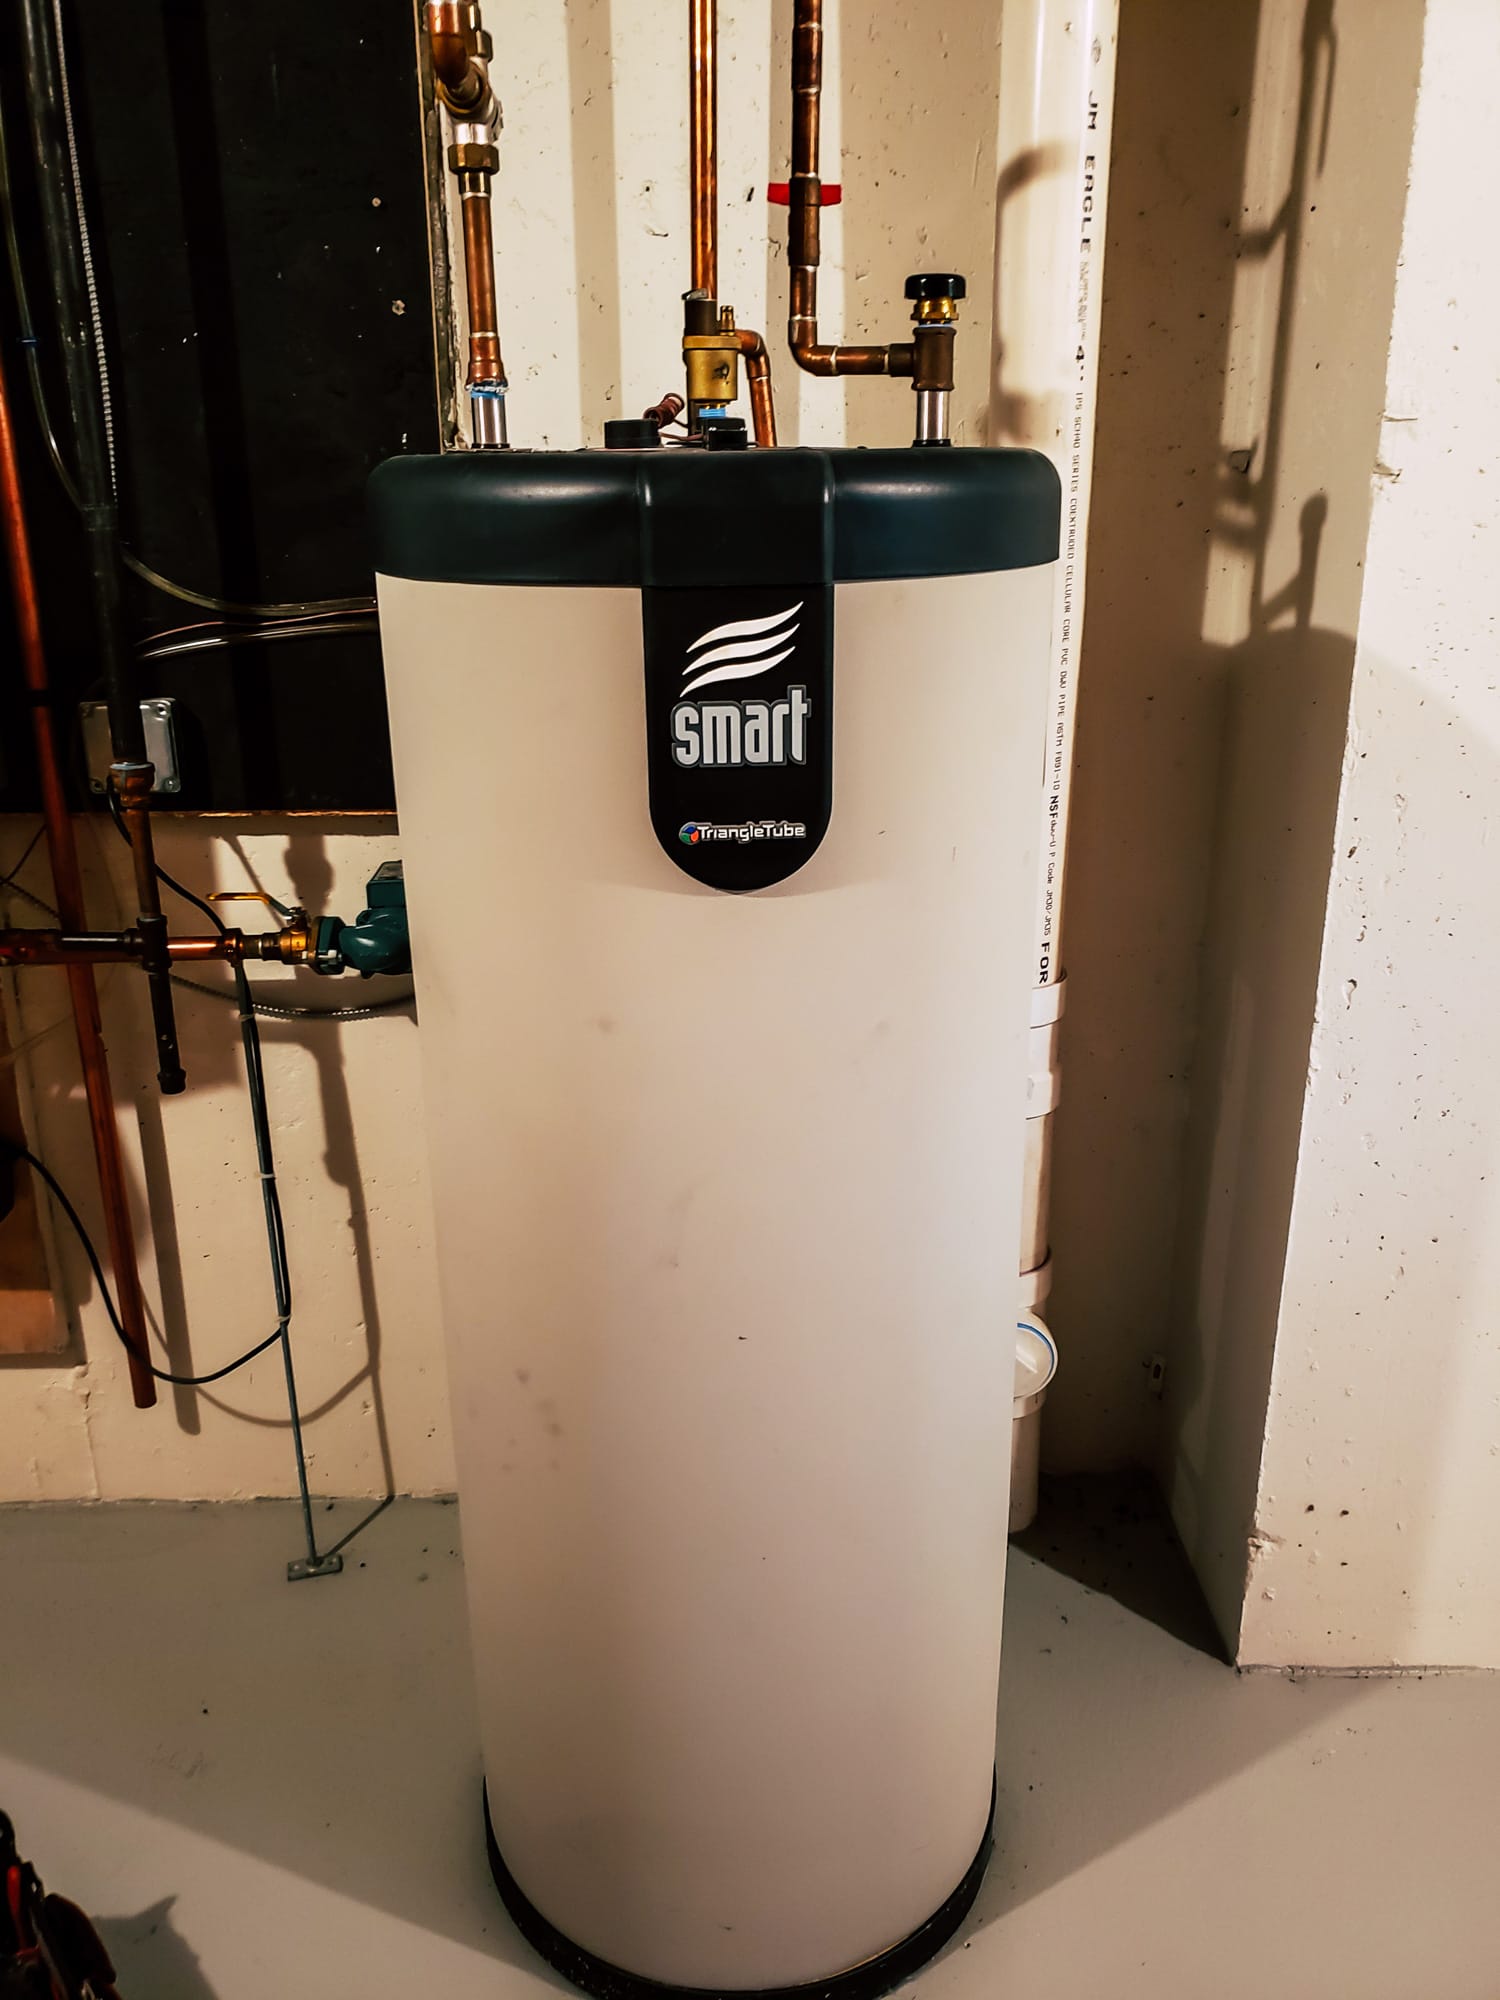 40 gallon smart high efficiency water heater storage tank in the basement of a residential home.